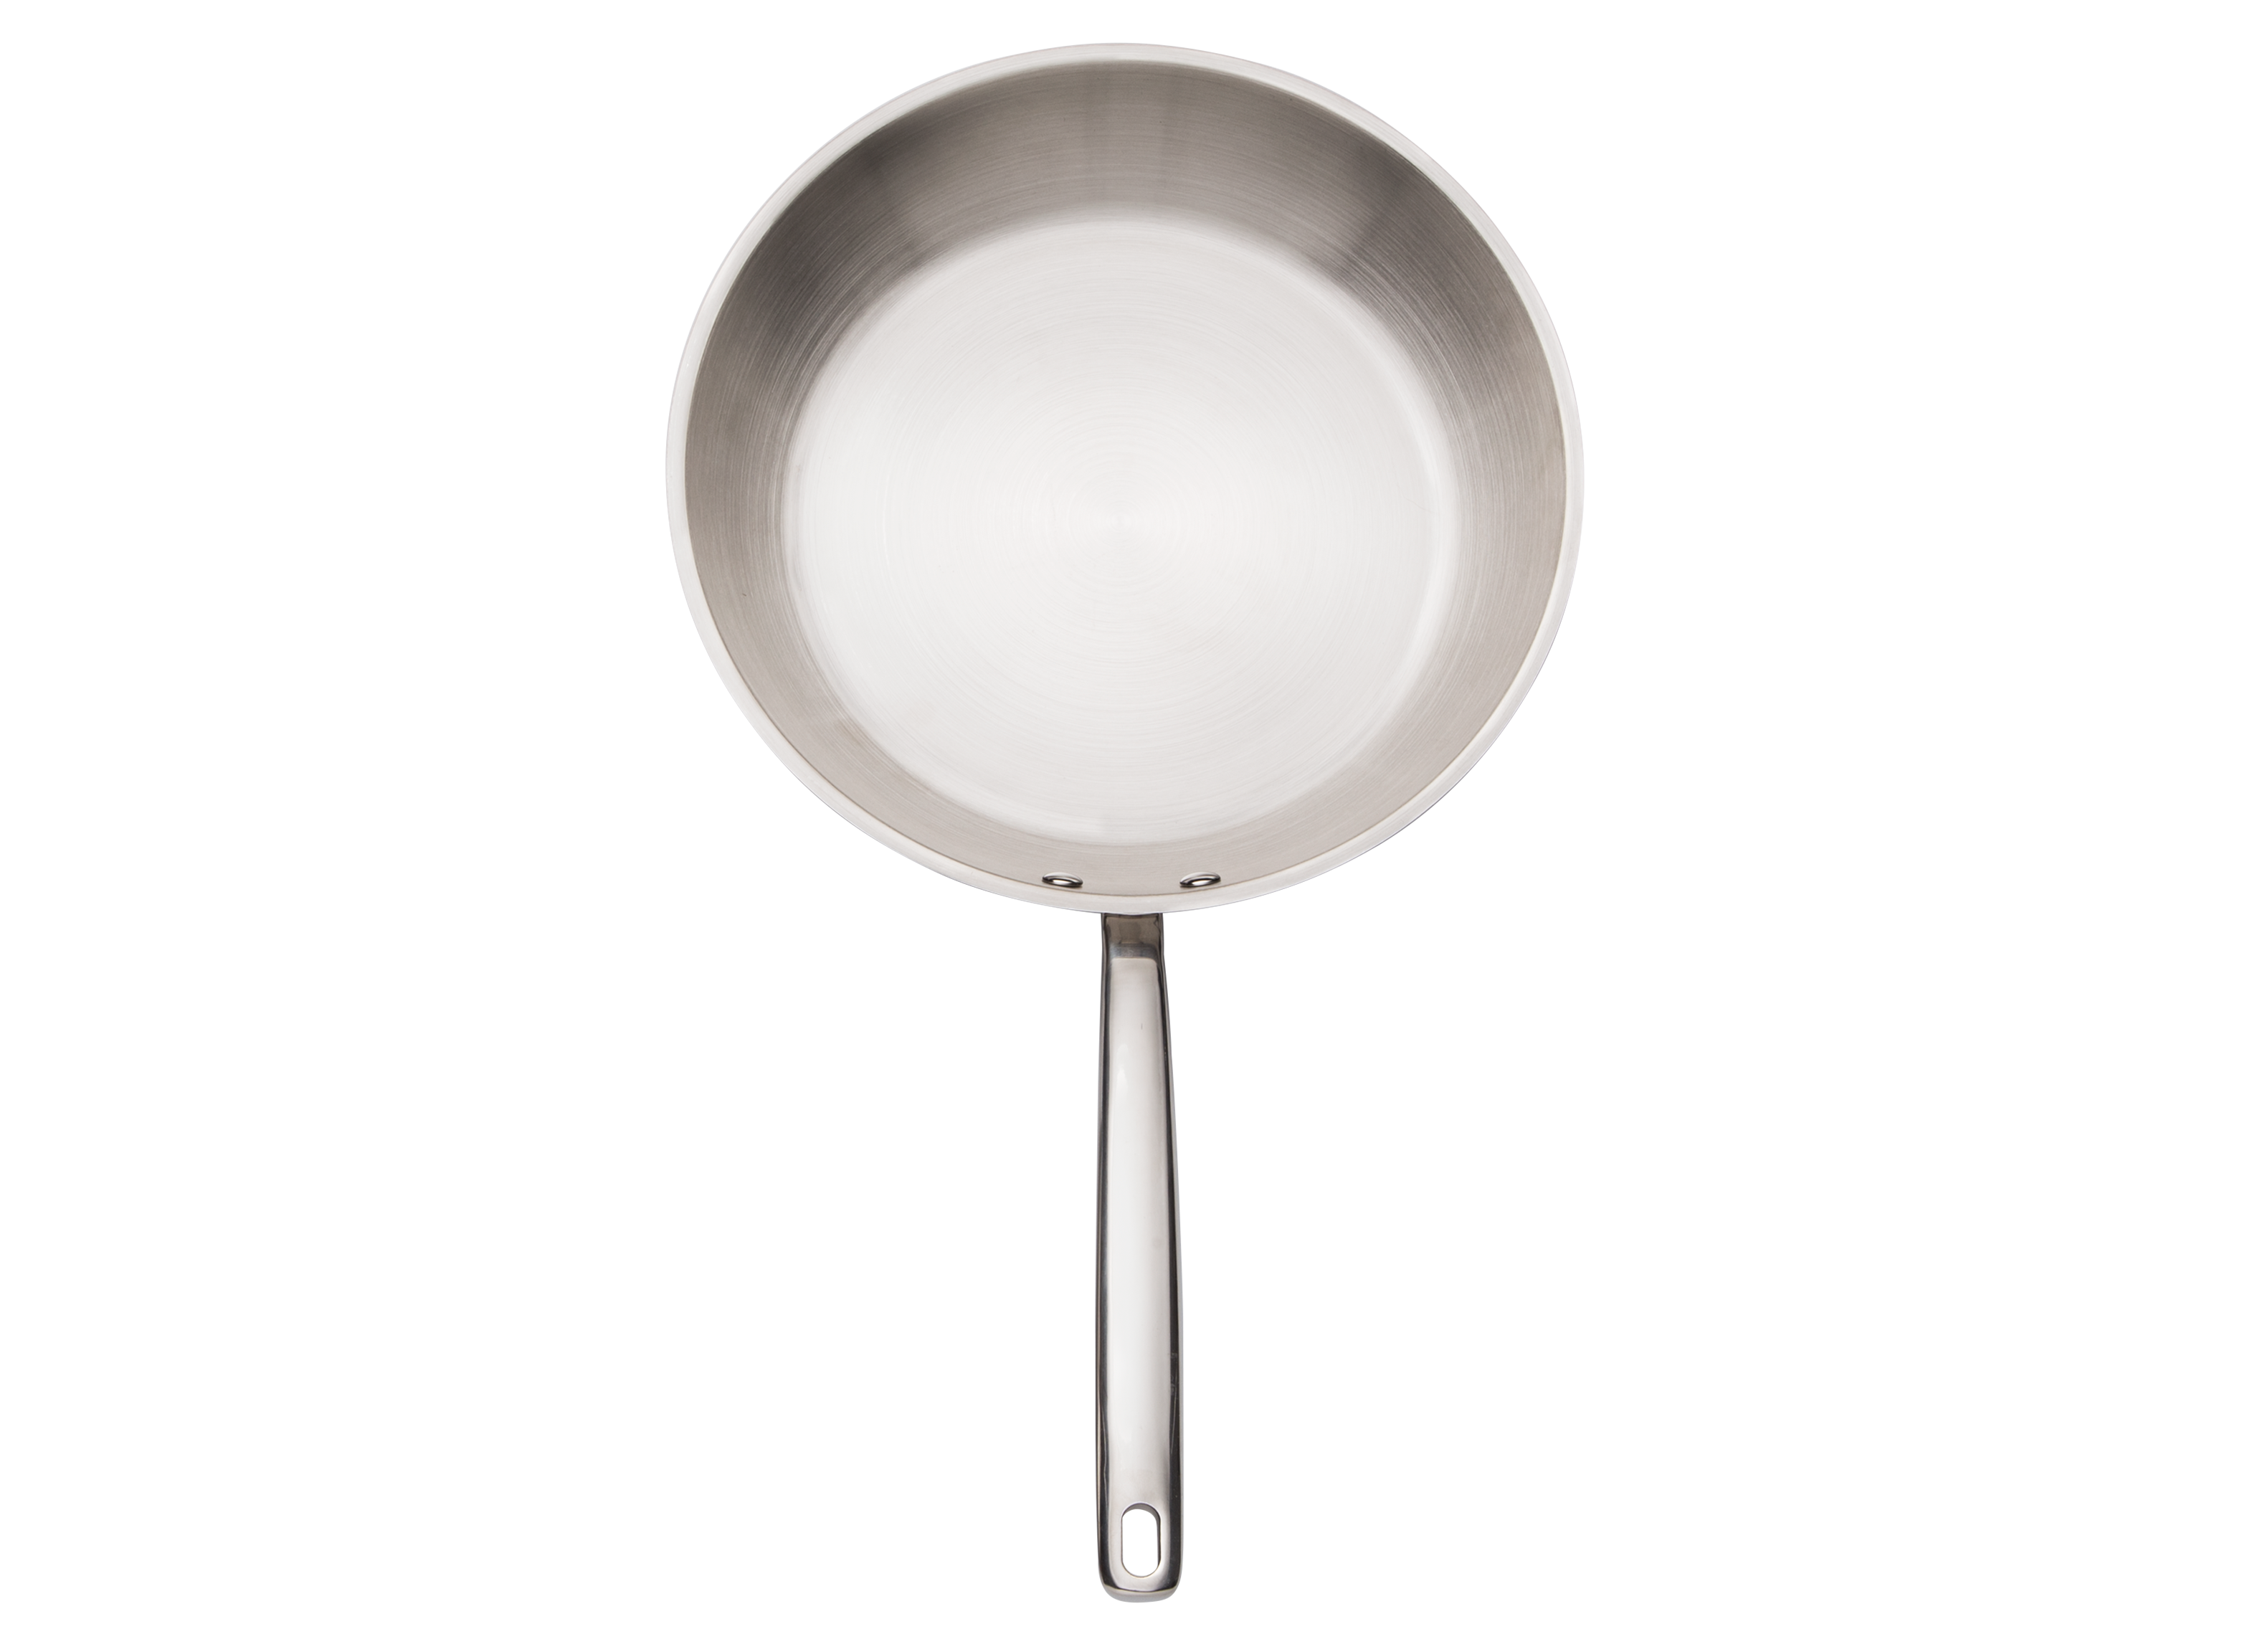 https://crdms.images.consumerreports.org/prod/products/cr/models/398746-frying-pans-other-made-by-design-stainless-steel-10005817.png